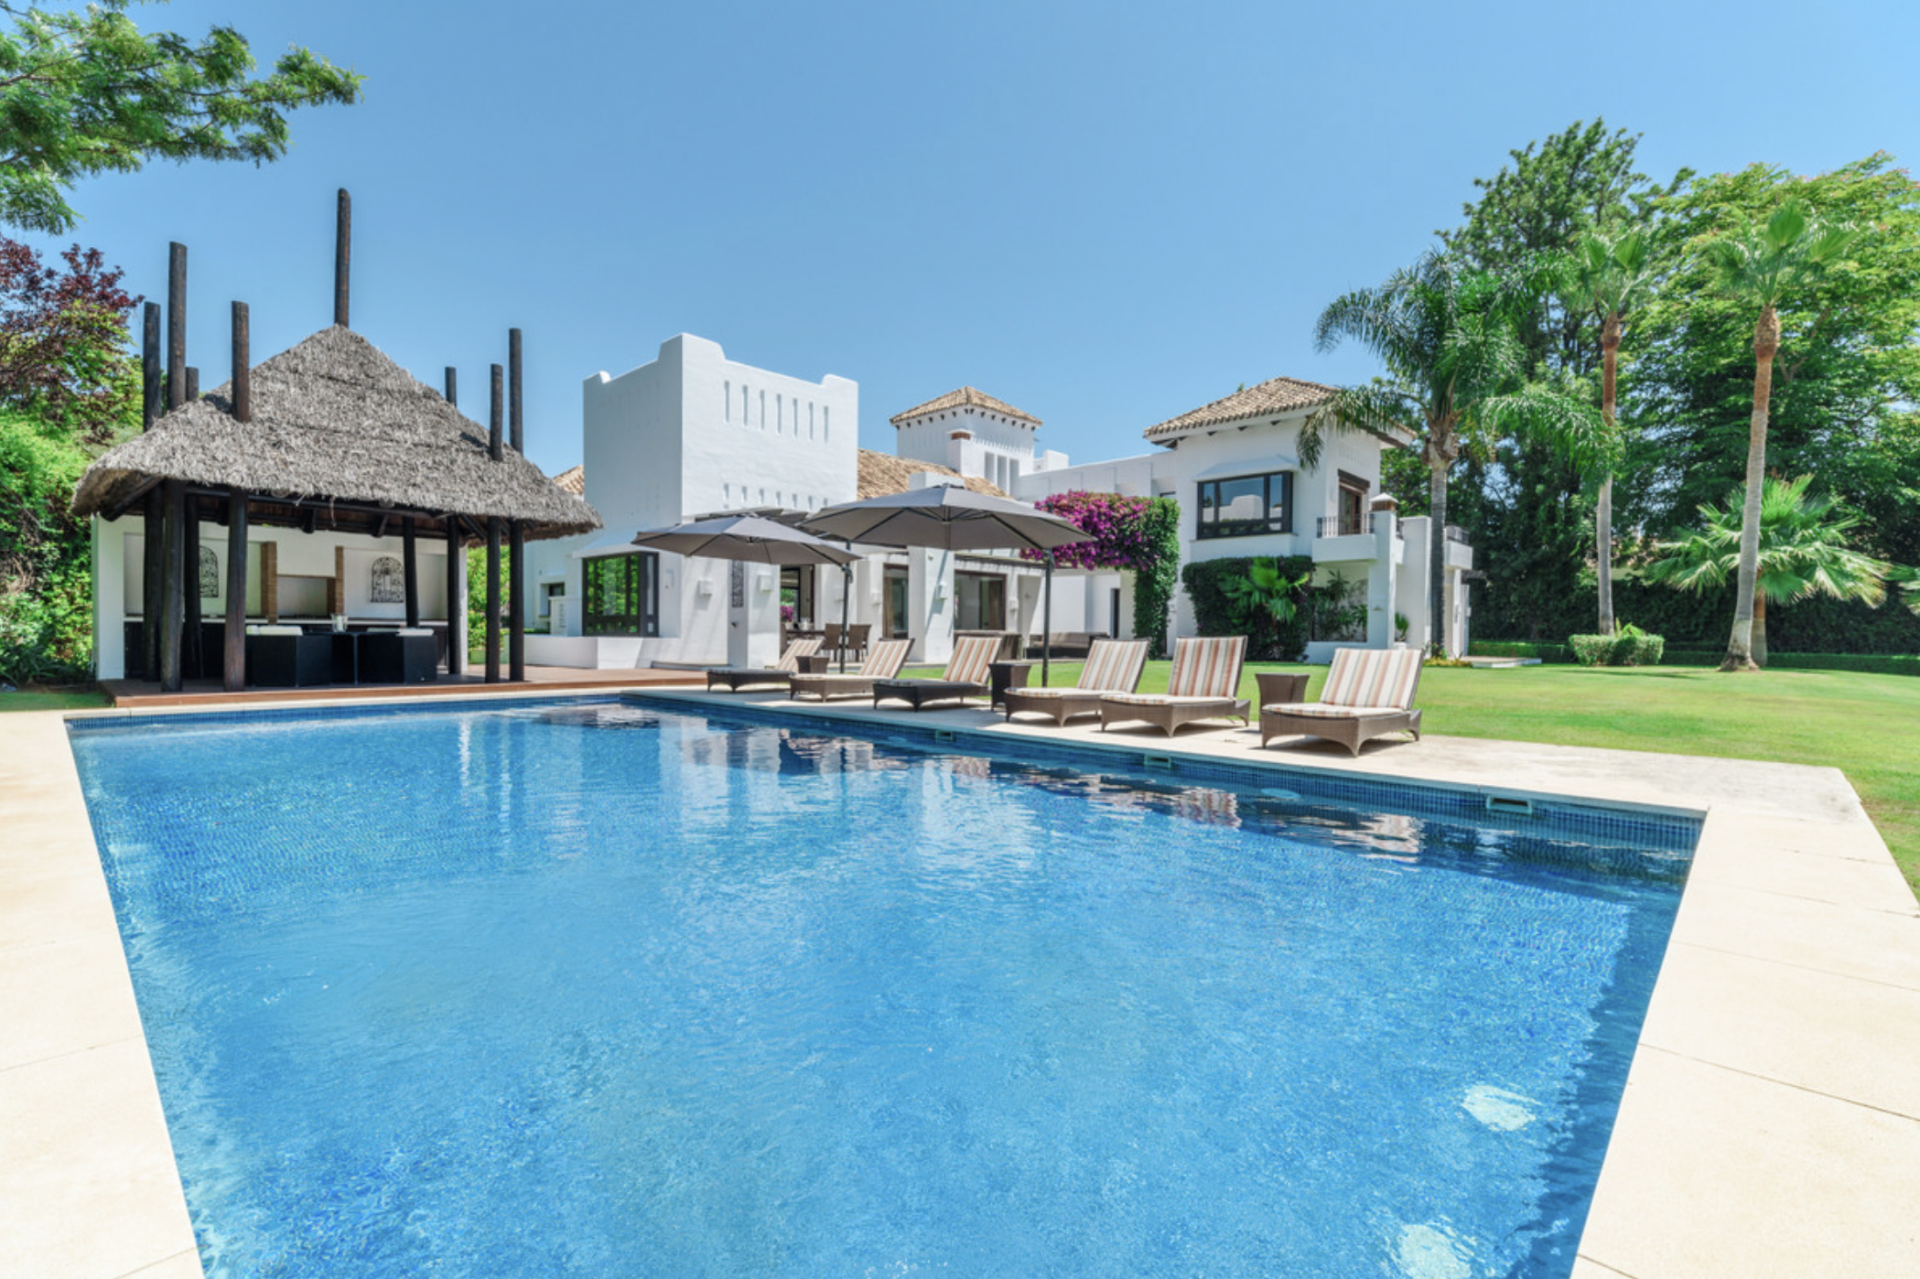 Elegant and spectacular villa in Guadalmina Baja, walking distance to the beautiful beach, 5 star hotel, two 18 hole golf courses and several beach restaurants.